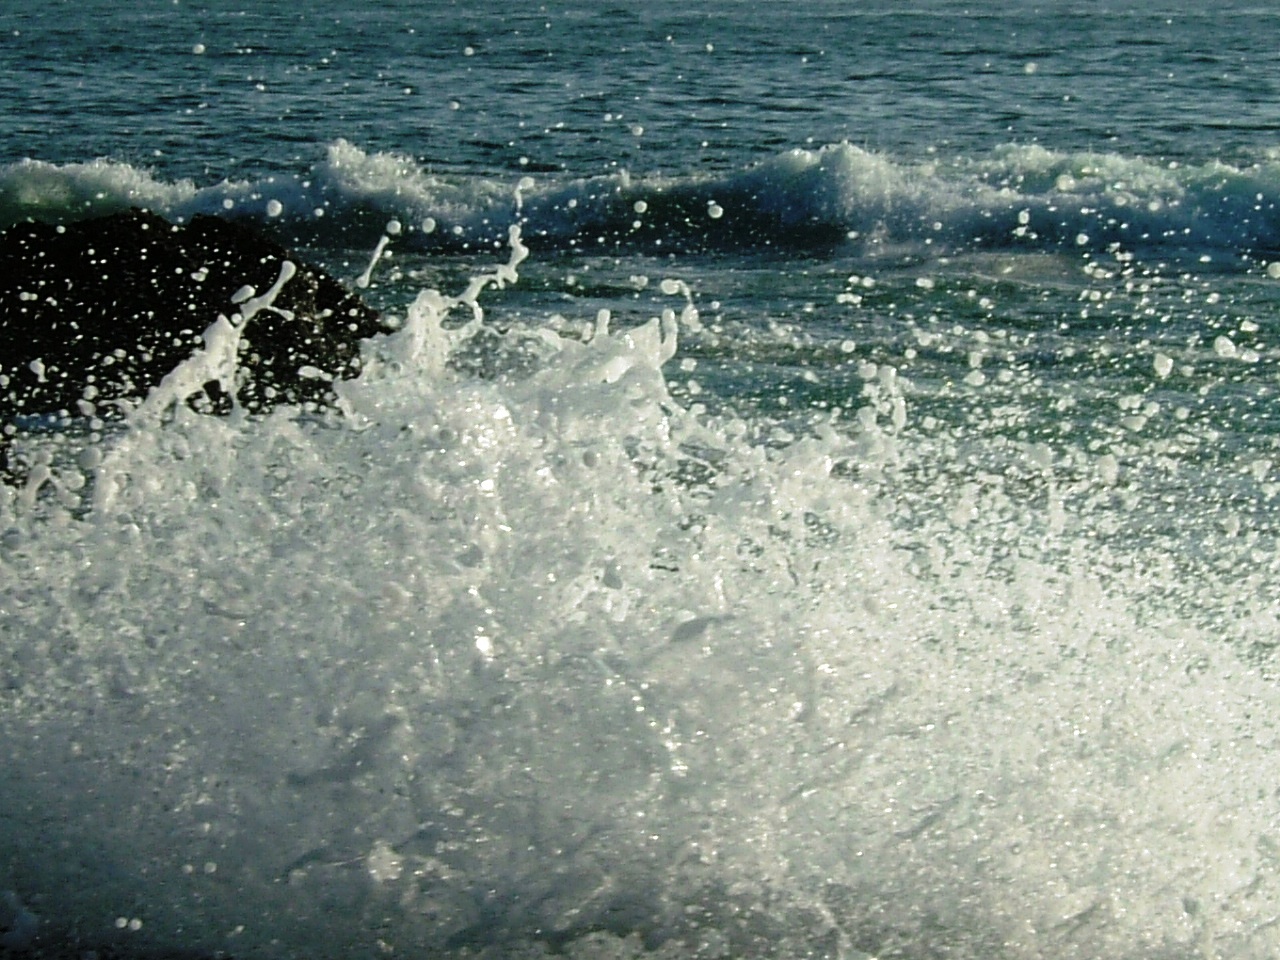 Waves coming into shore